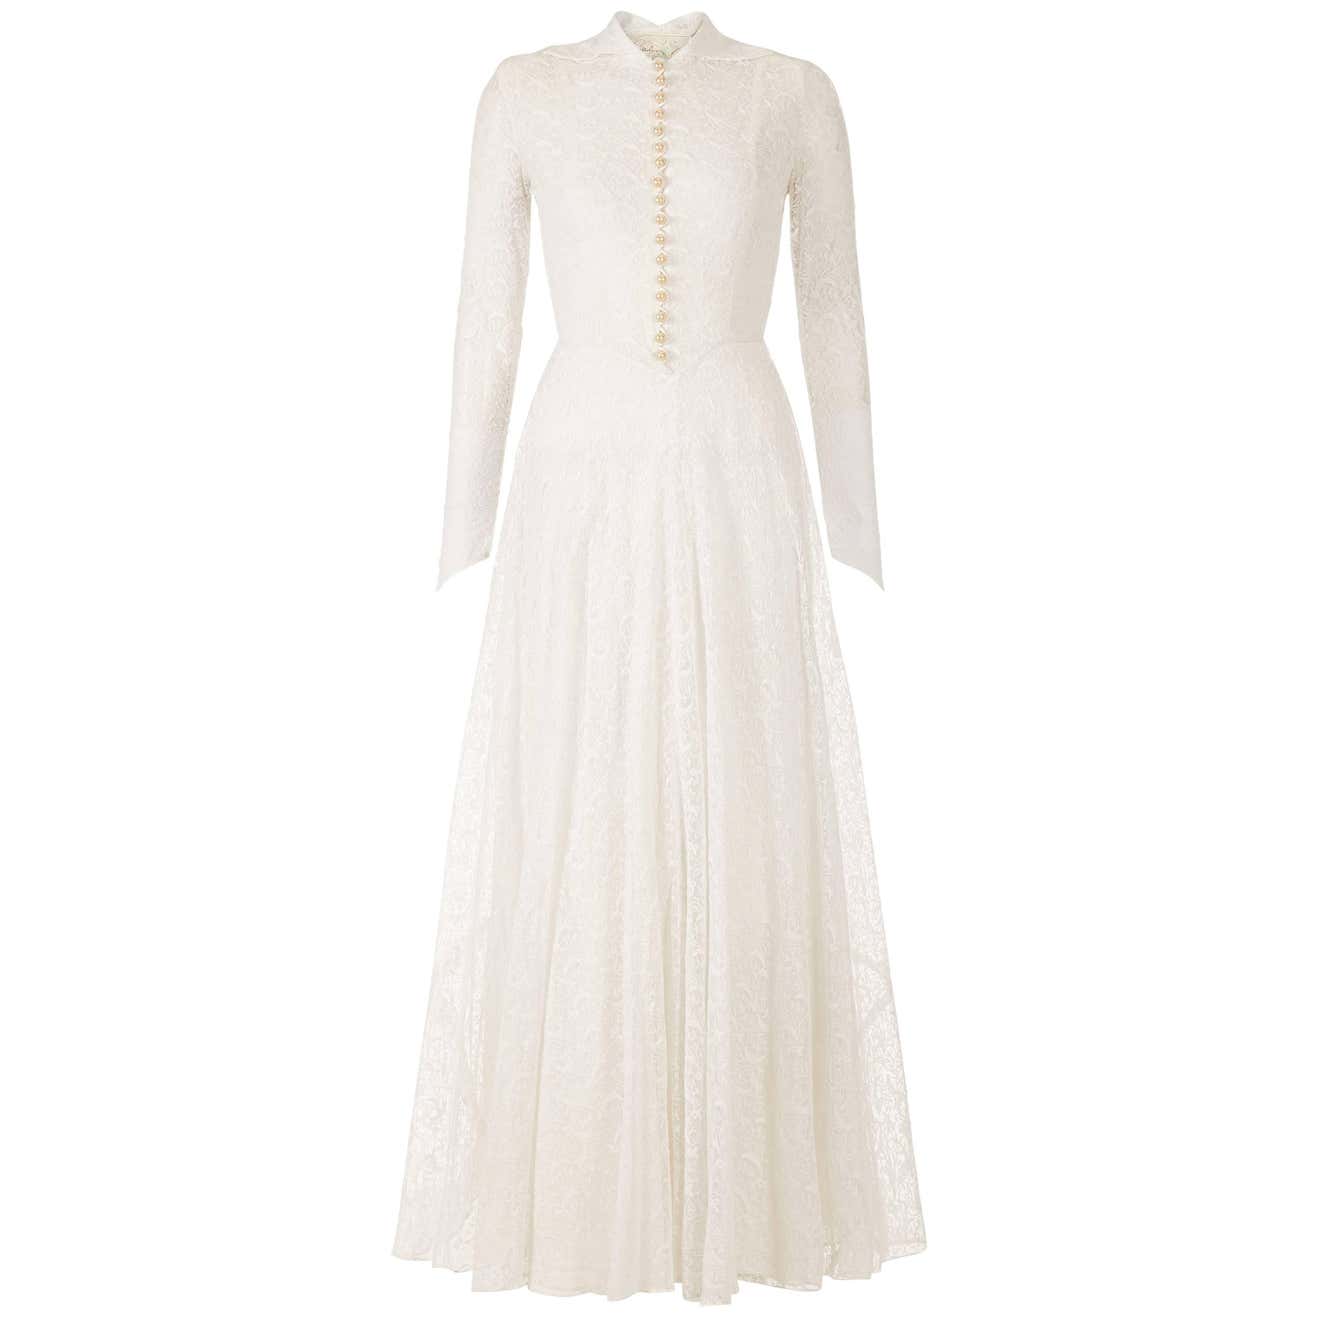 Grace Kelly Style 1950s White Lace Bridal Gown With Pearl Buttons For ...